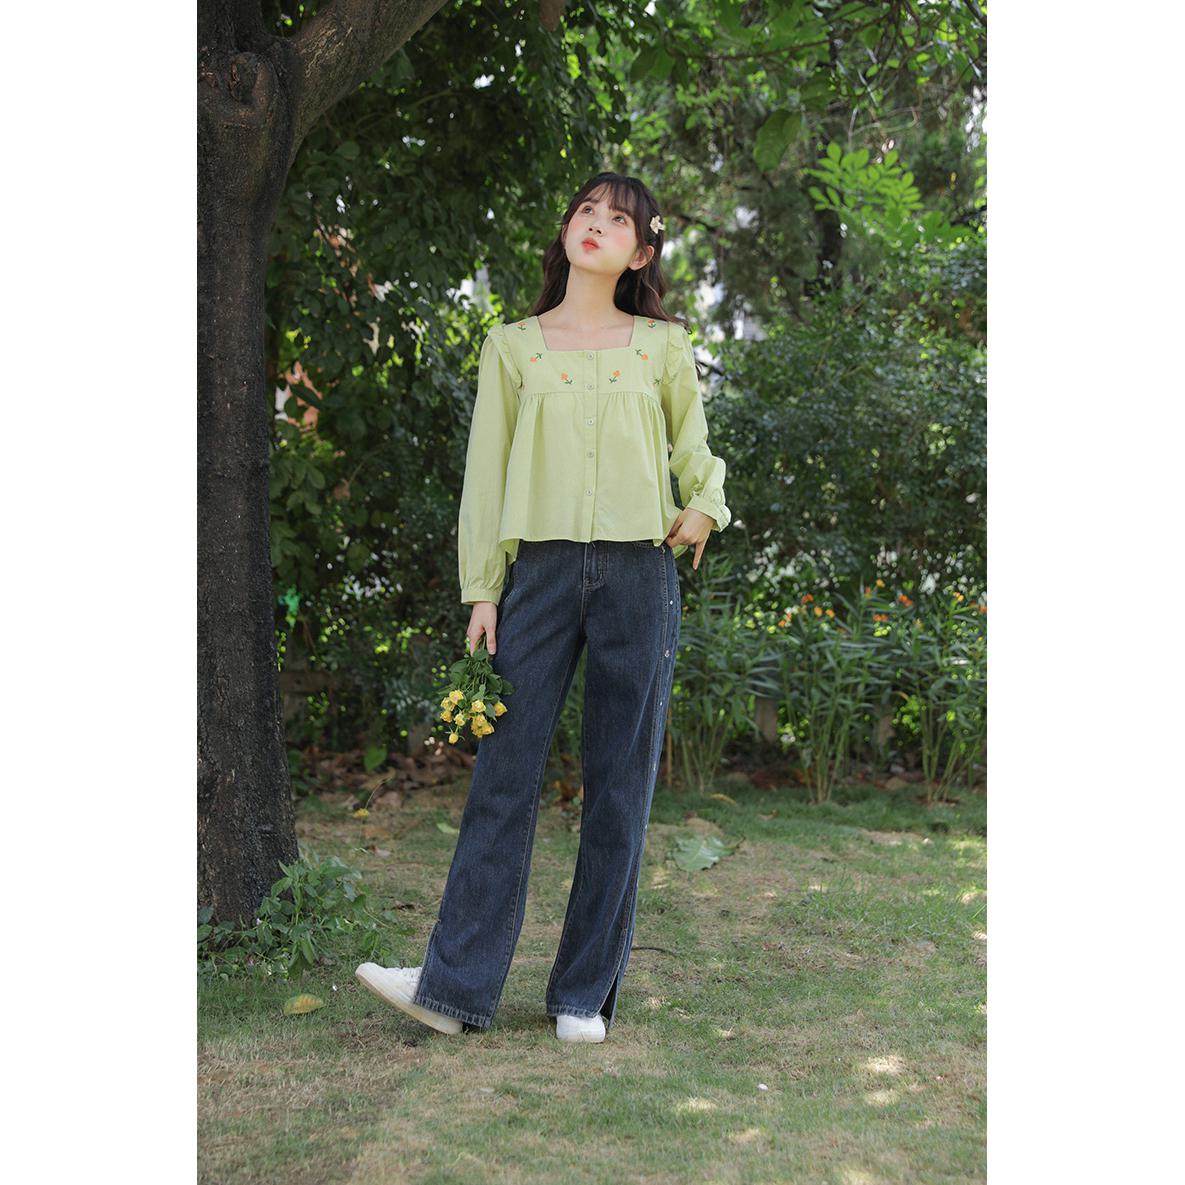 Flower Embroidery Square Collar Long Sleeve Blouse